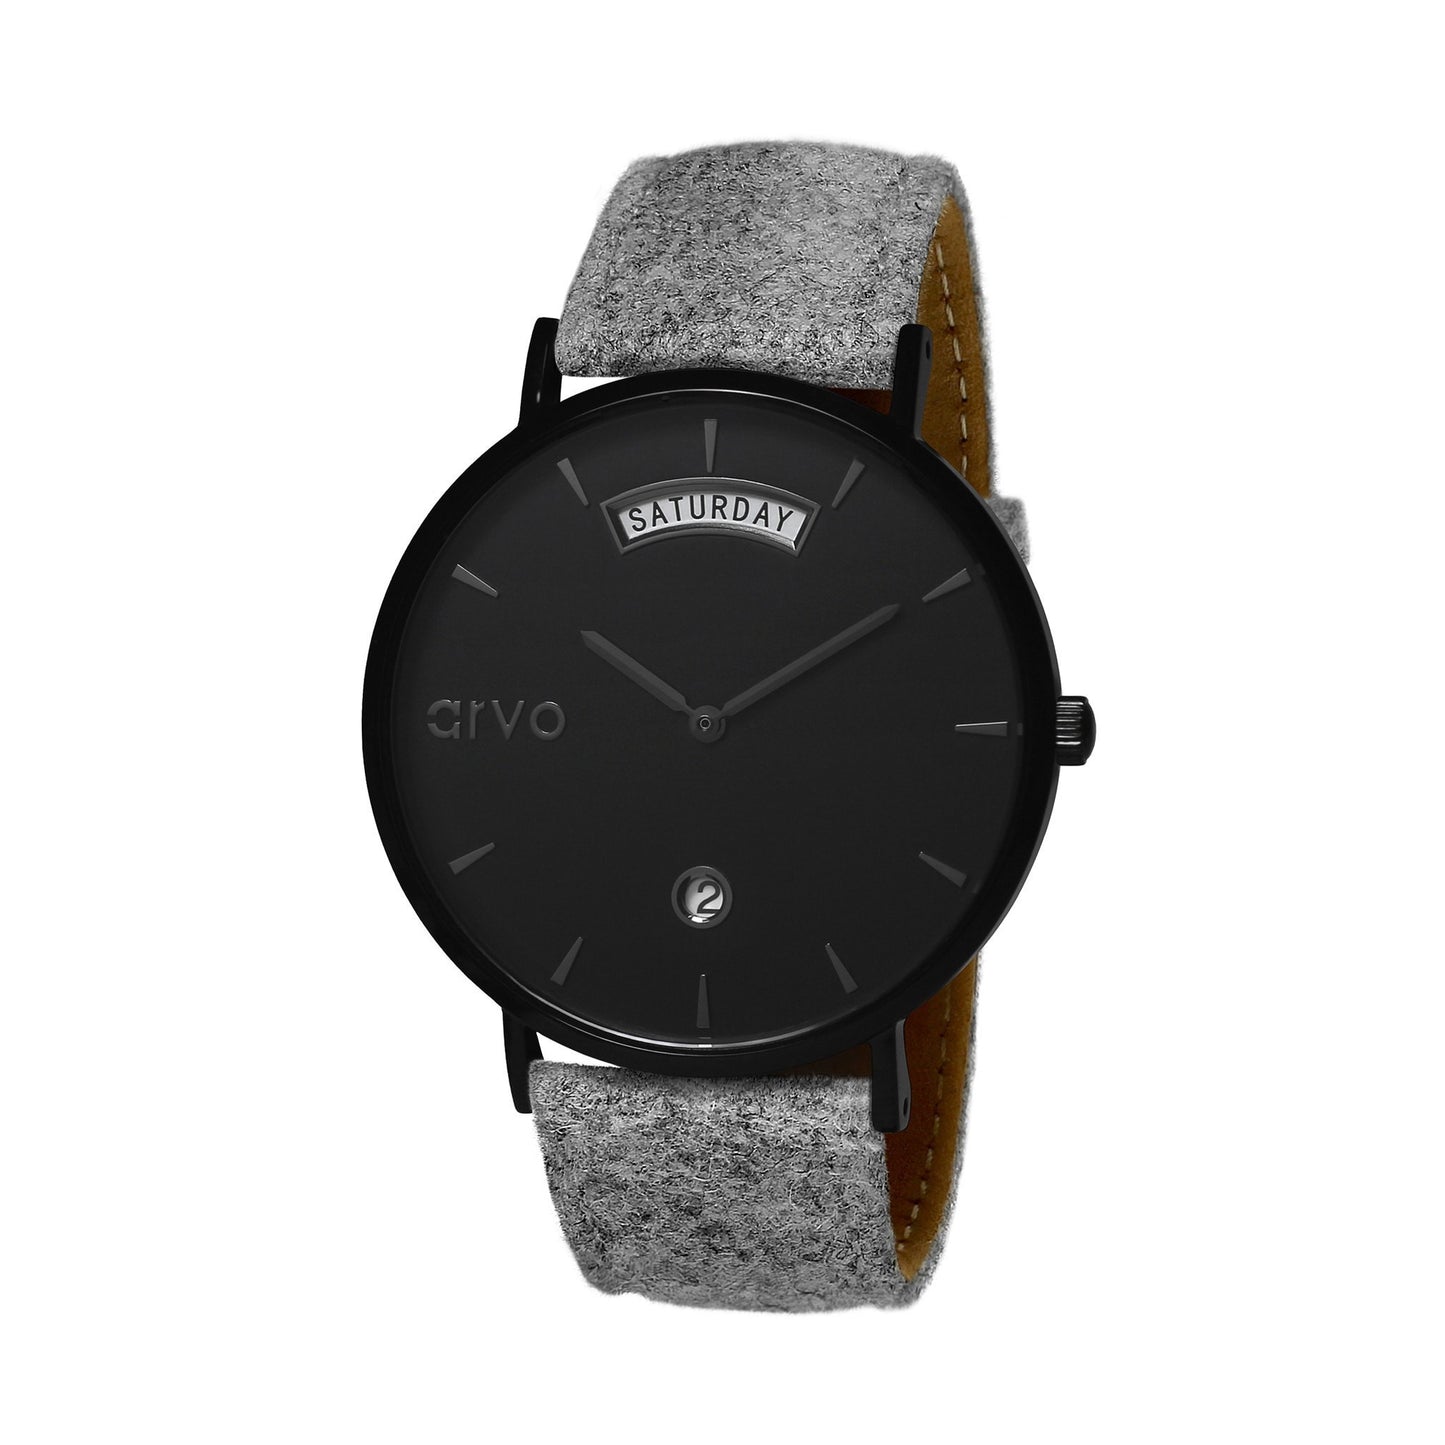 36mm - Arvo Black Awristacrat Watch with a black dial and case and a great felt watch band - For men and women